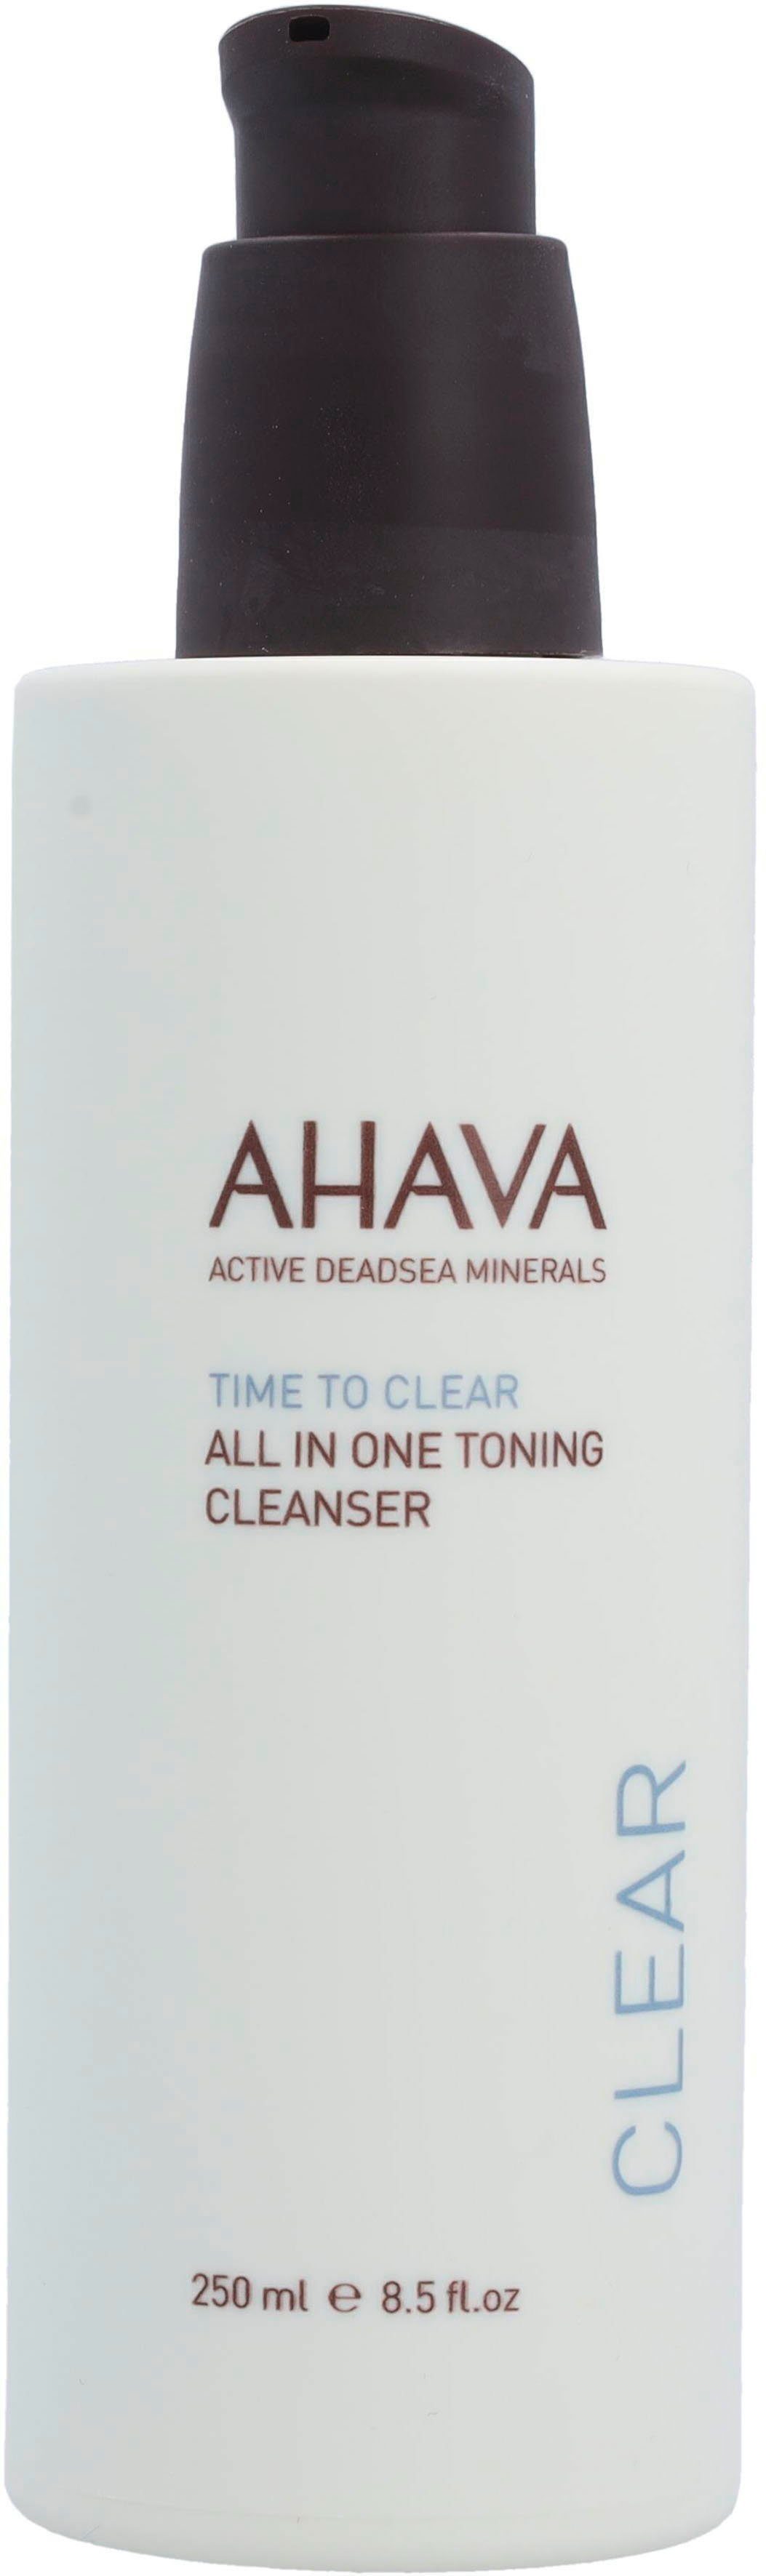 Gesichts-Reinigungslotion To One Clear In Time AHAVA Cleanser All Toning